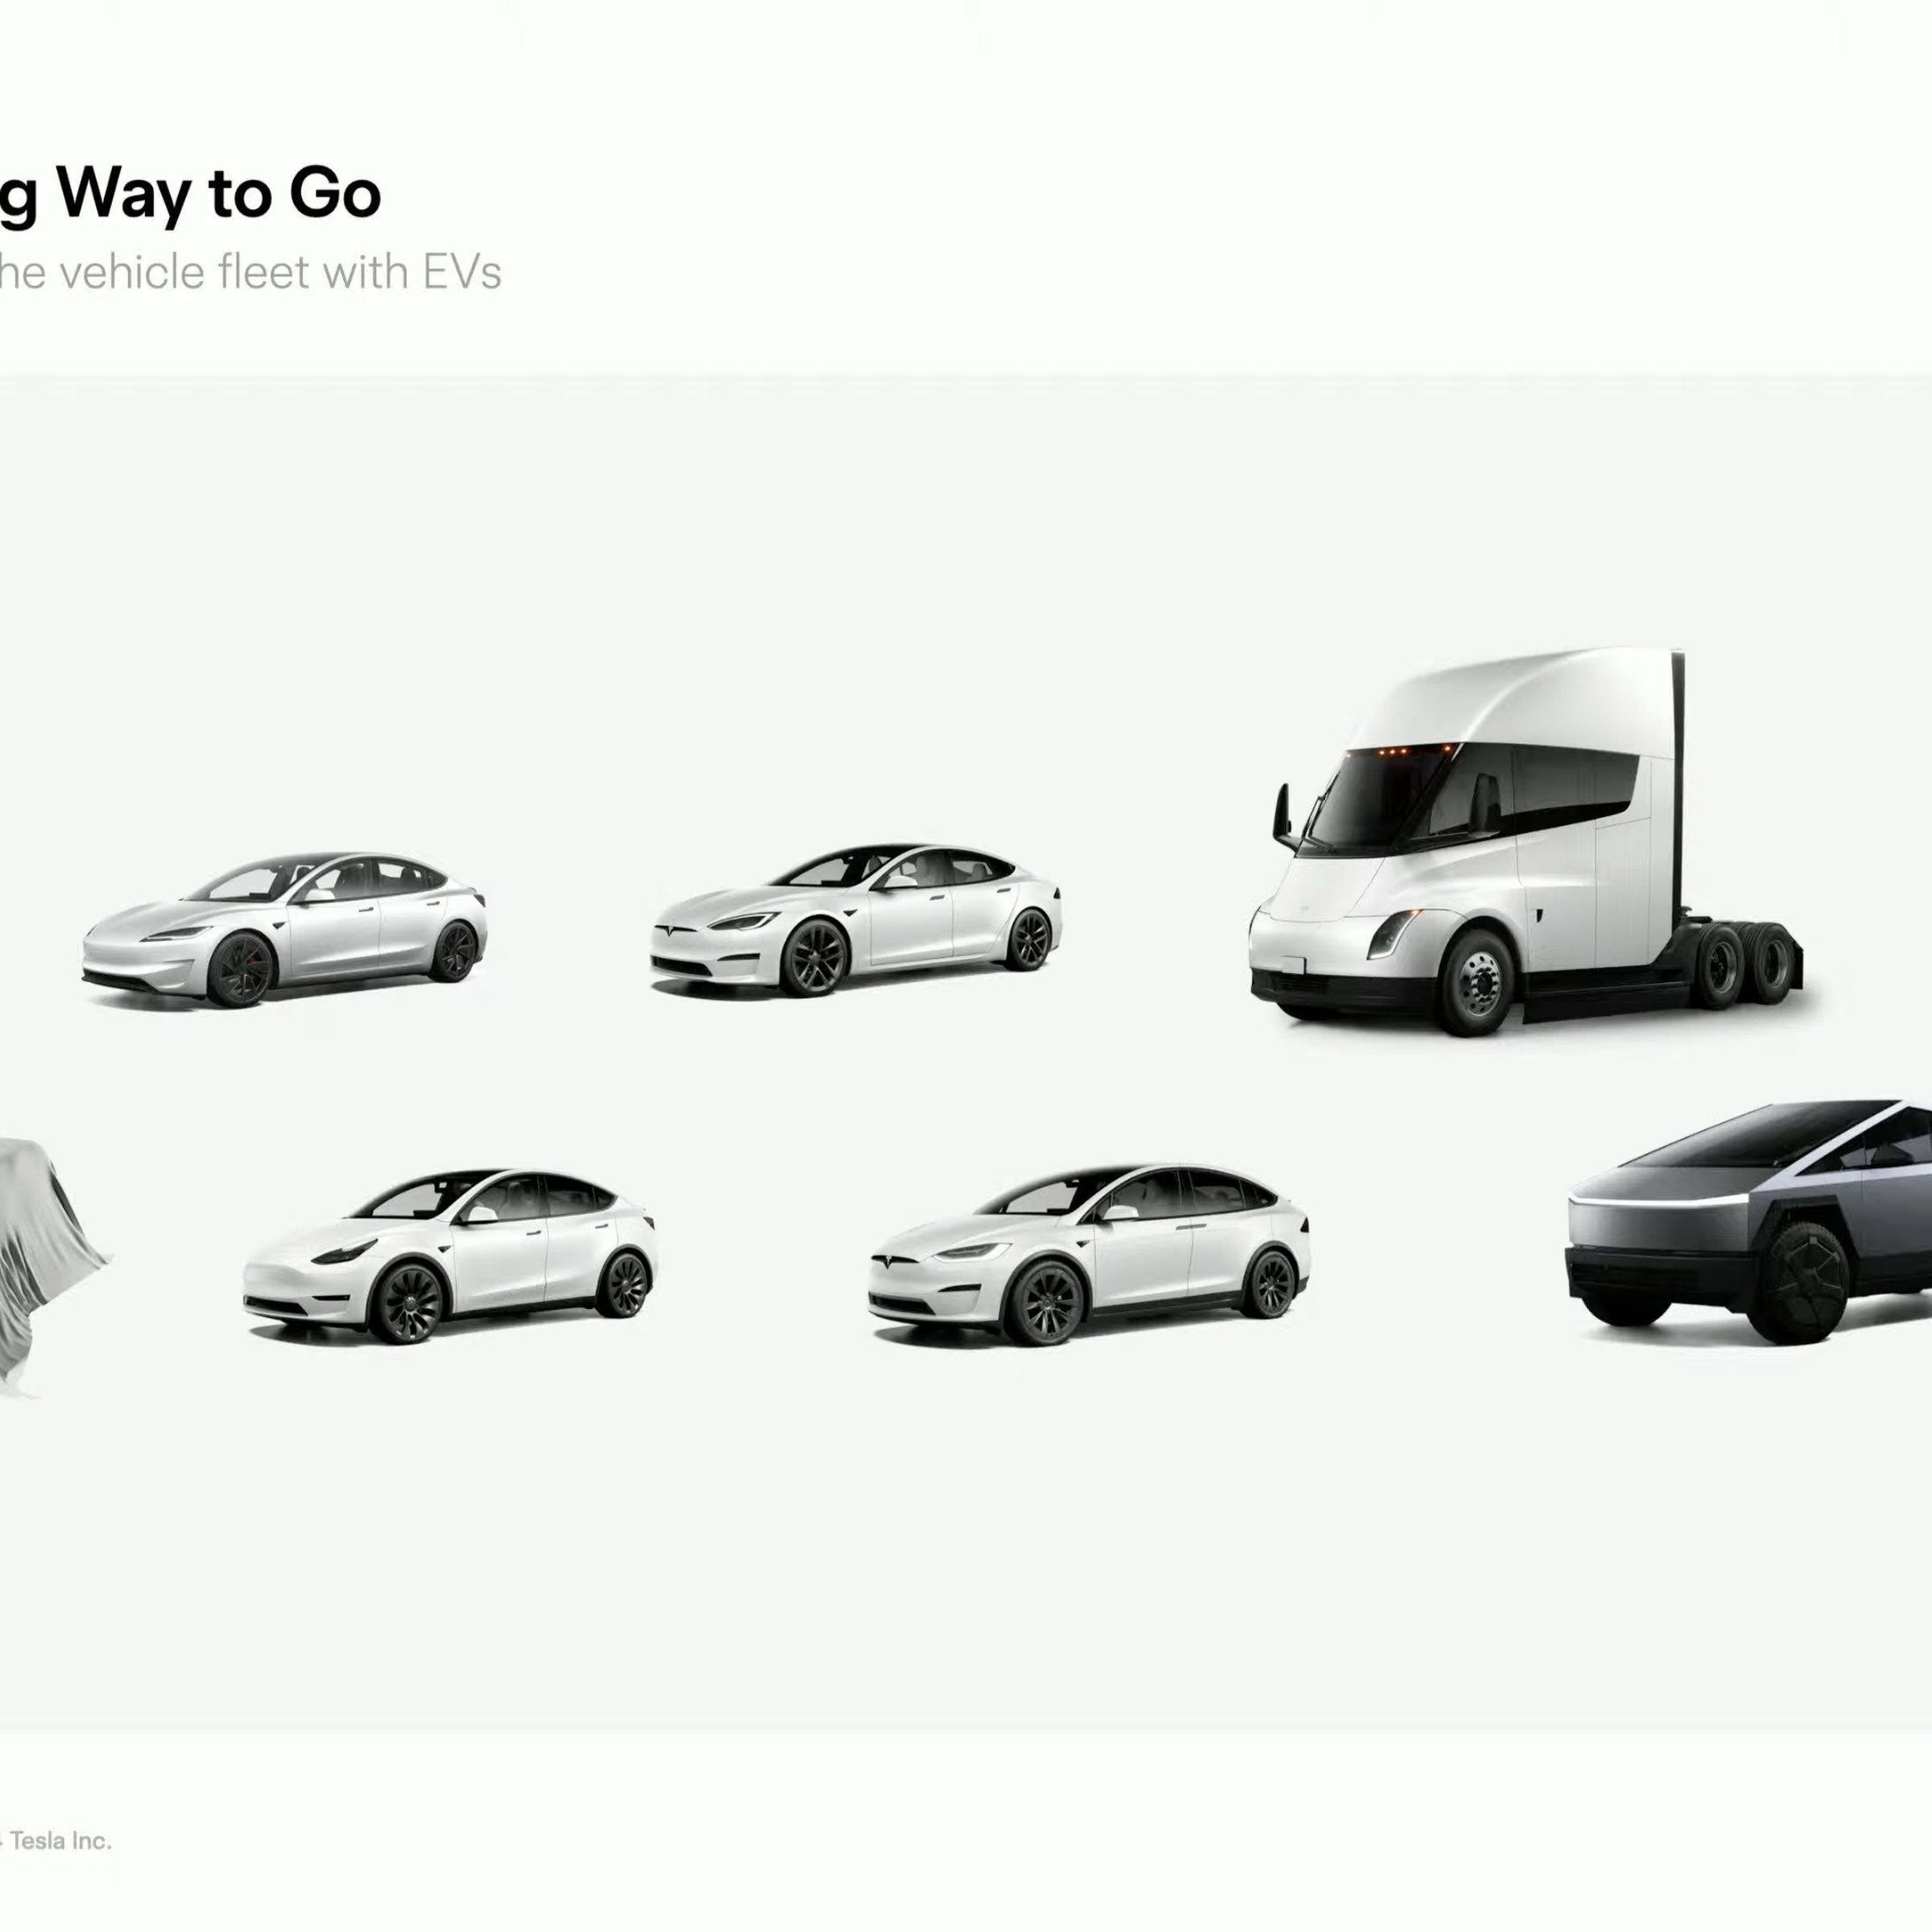 A graphic showing Tesla’s current and future vehicle lineup